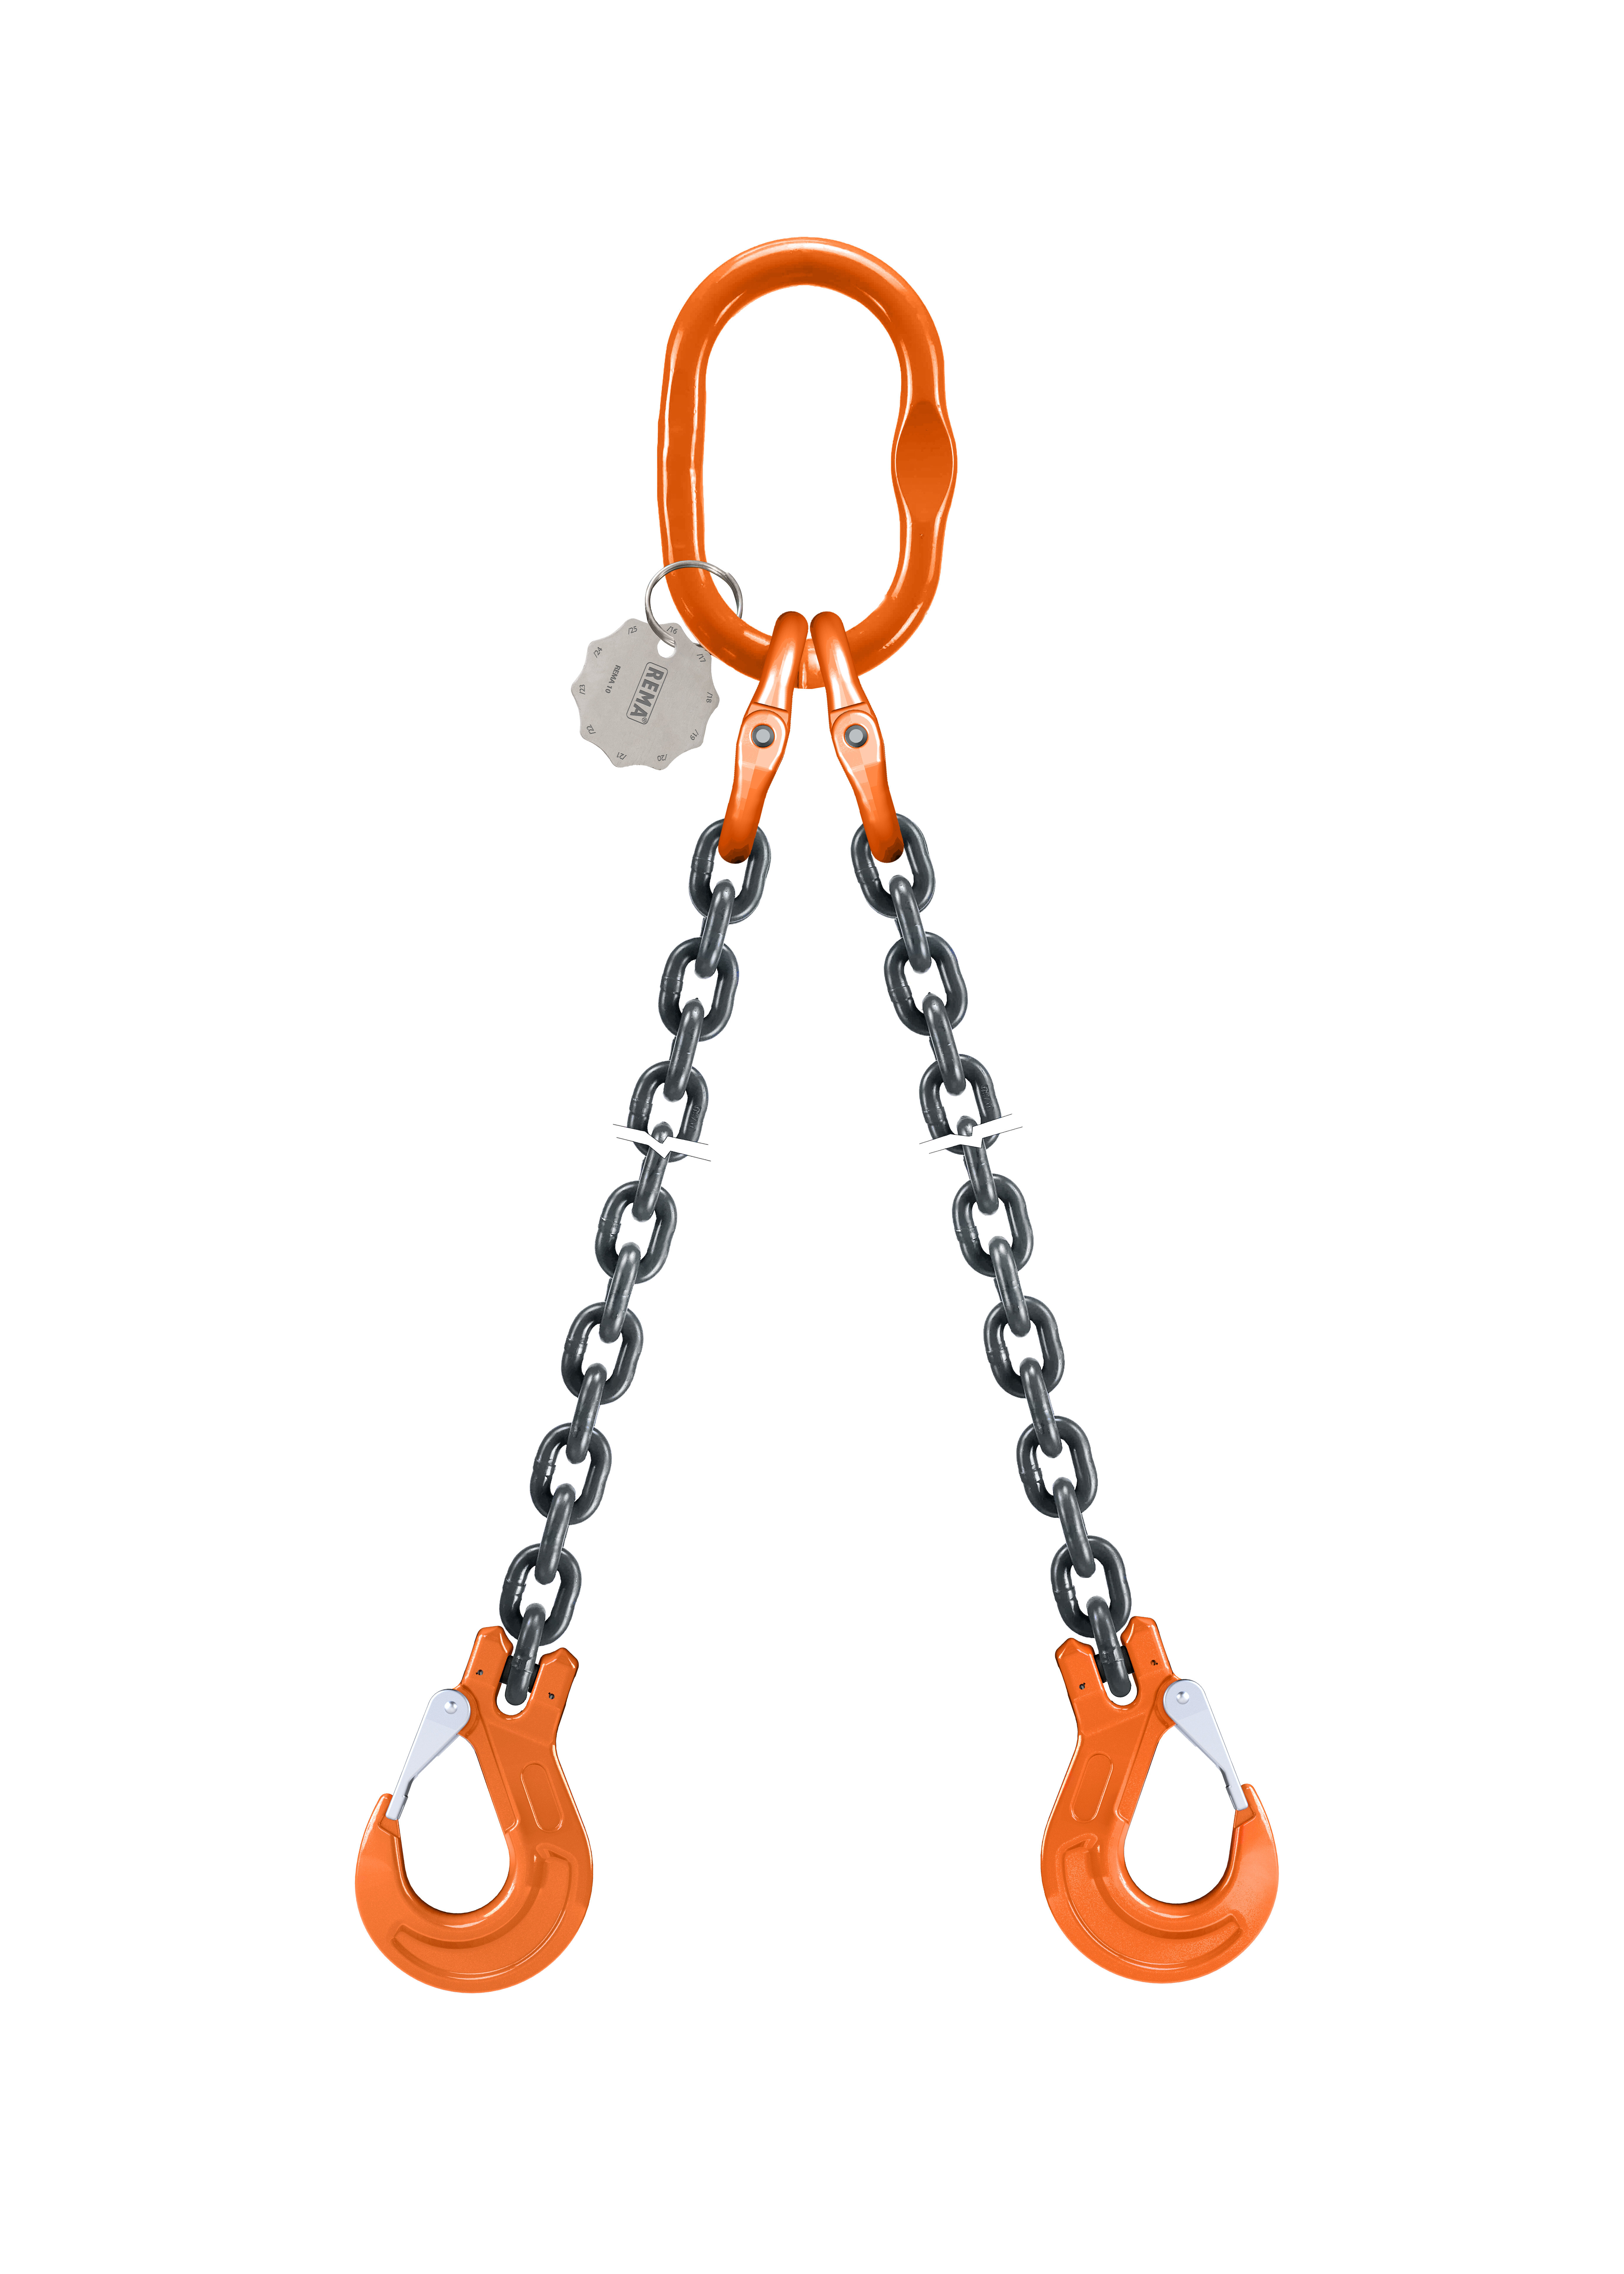 Two Leg Slings: Suitable for balancing a load with two lifting points.